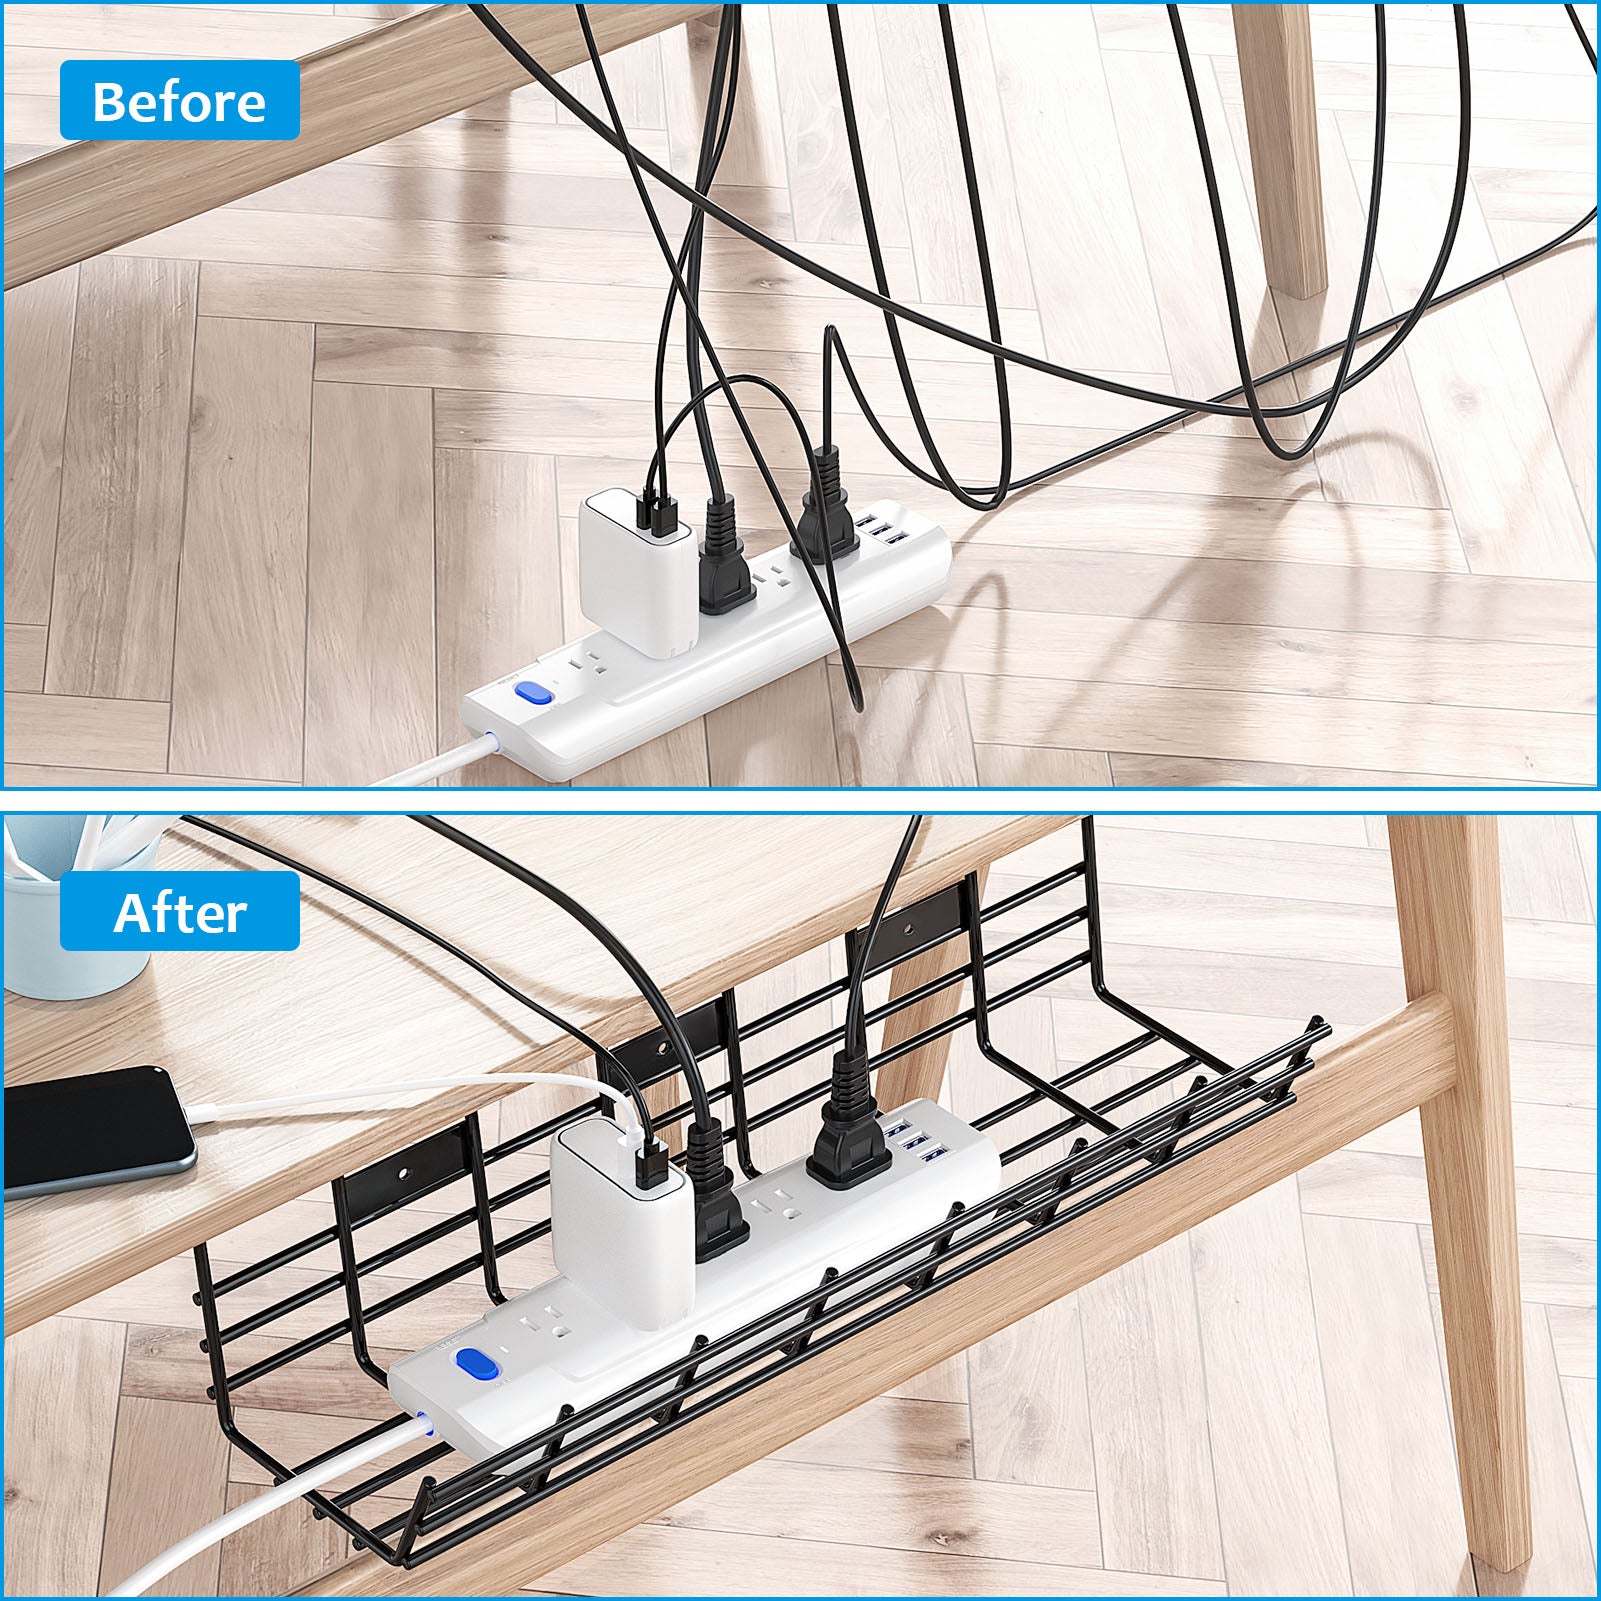 Under-Desk Cable Tray Horizontal Wire Management Cradle